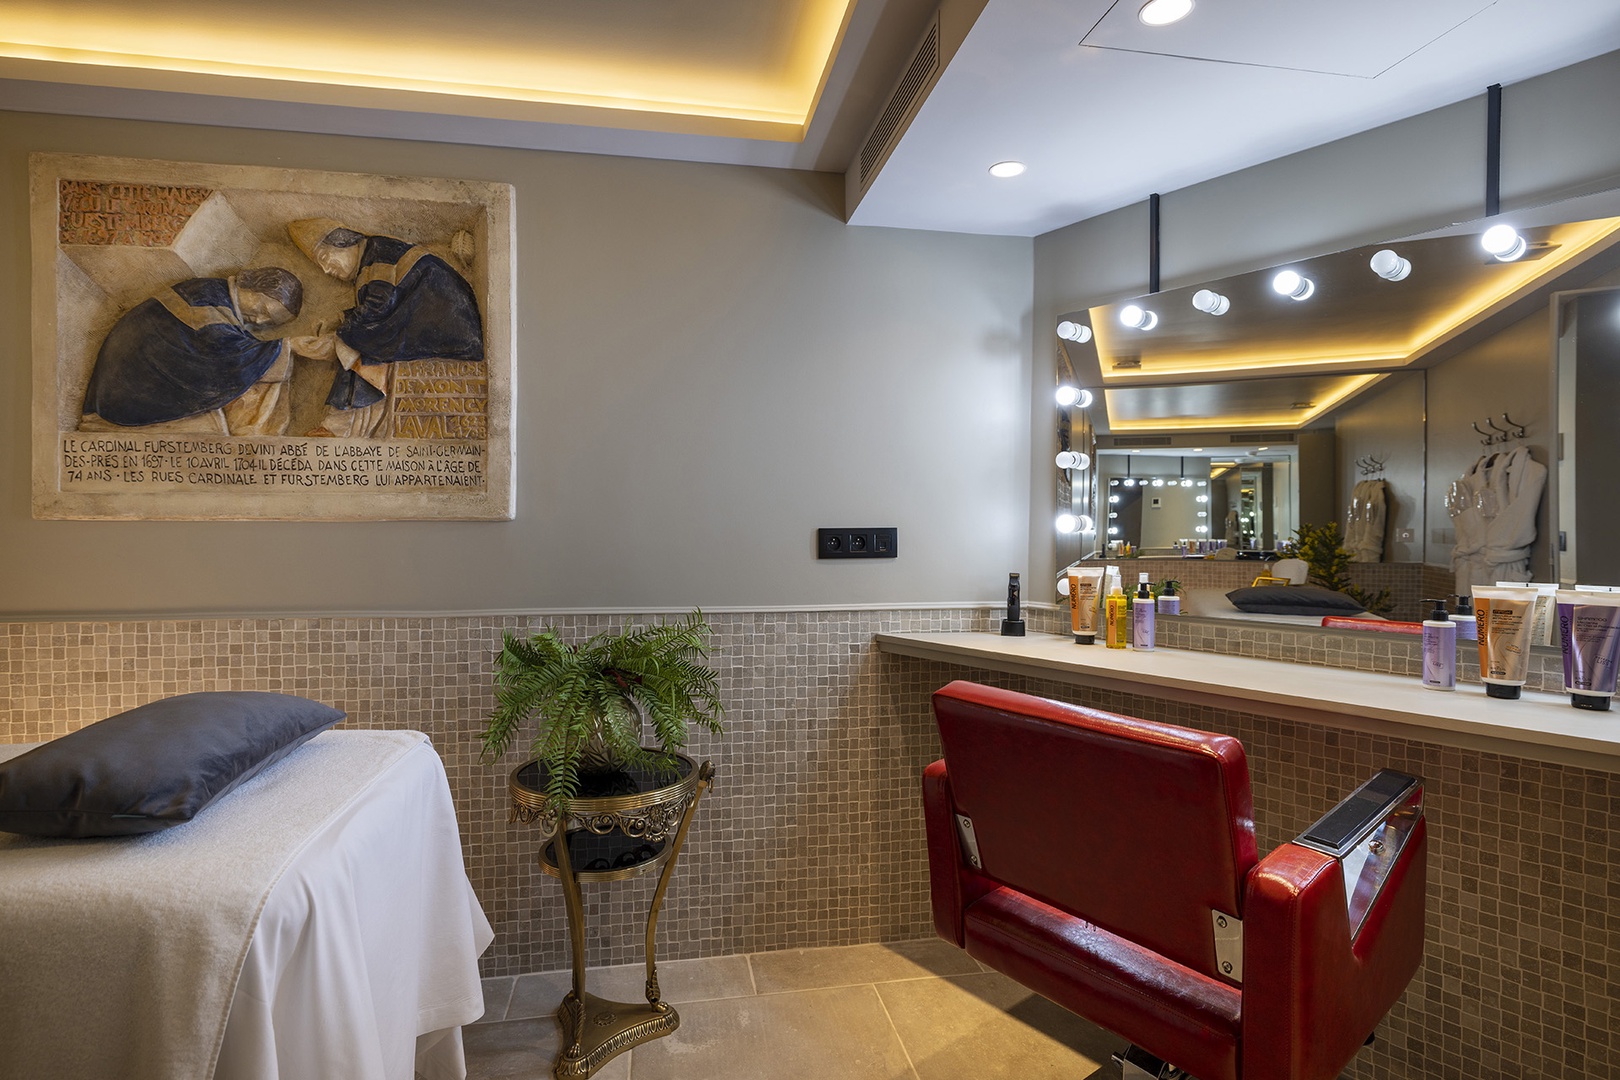 Spa treatments and hairdressing services can be arranged.